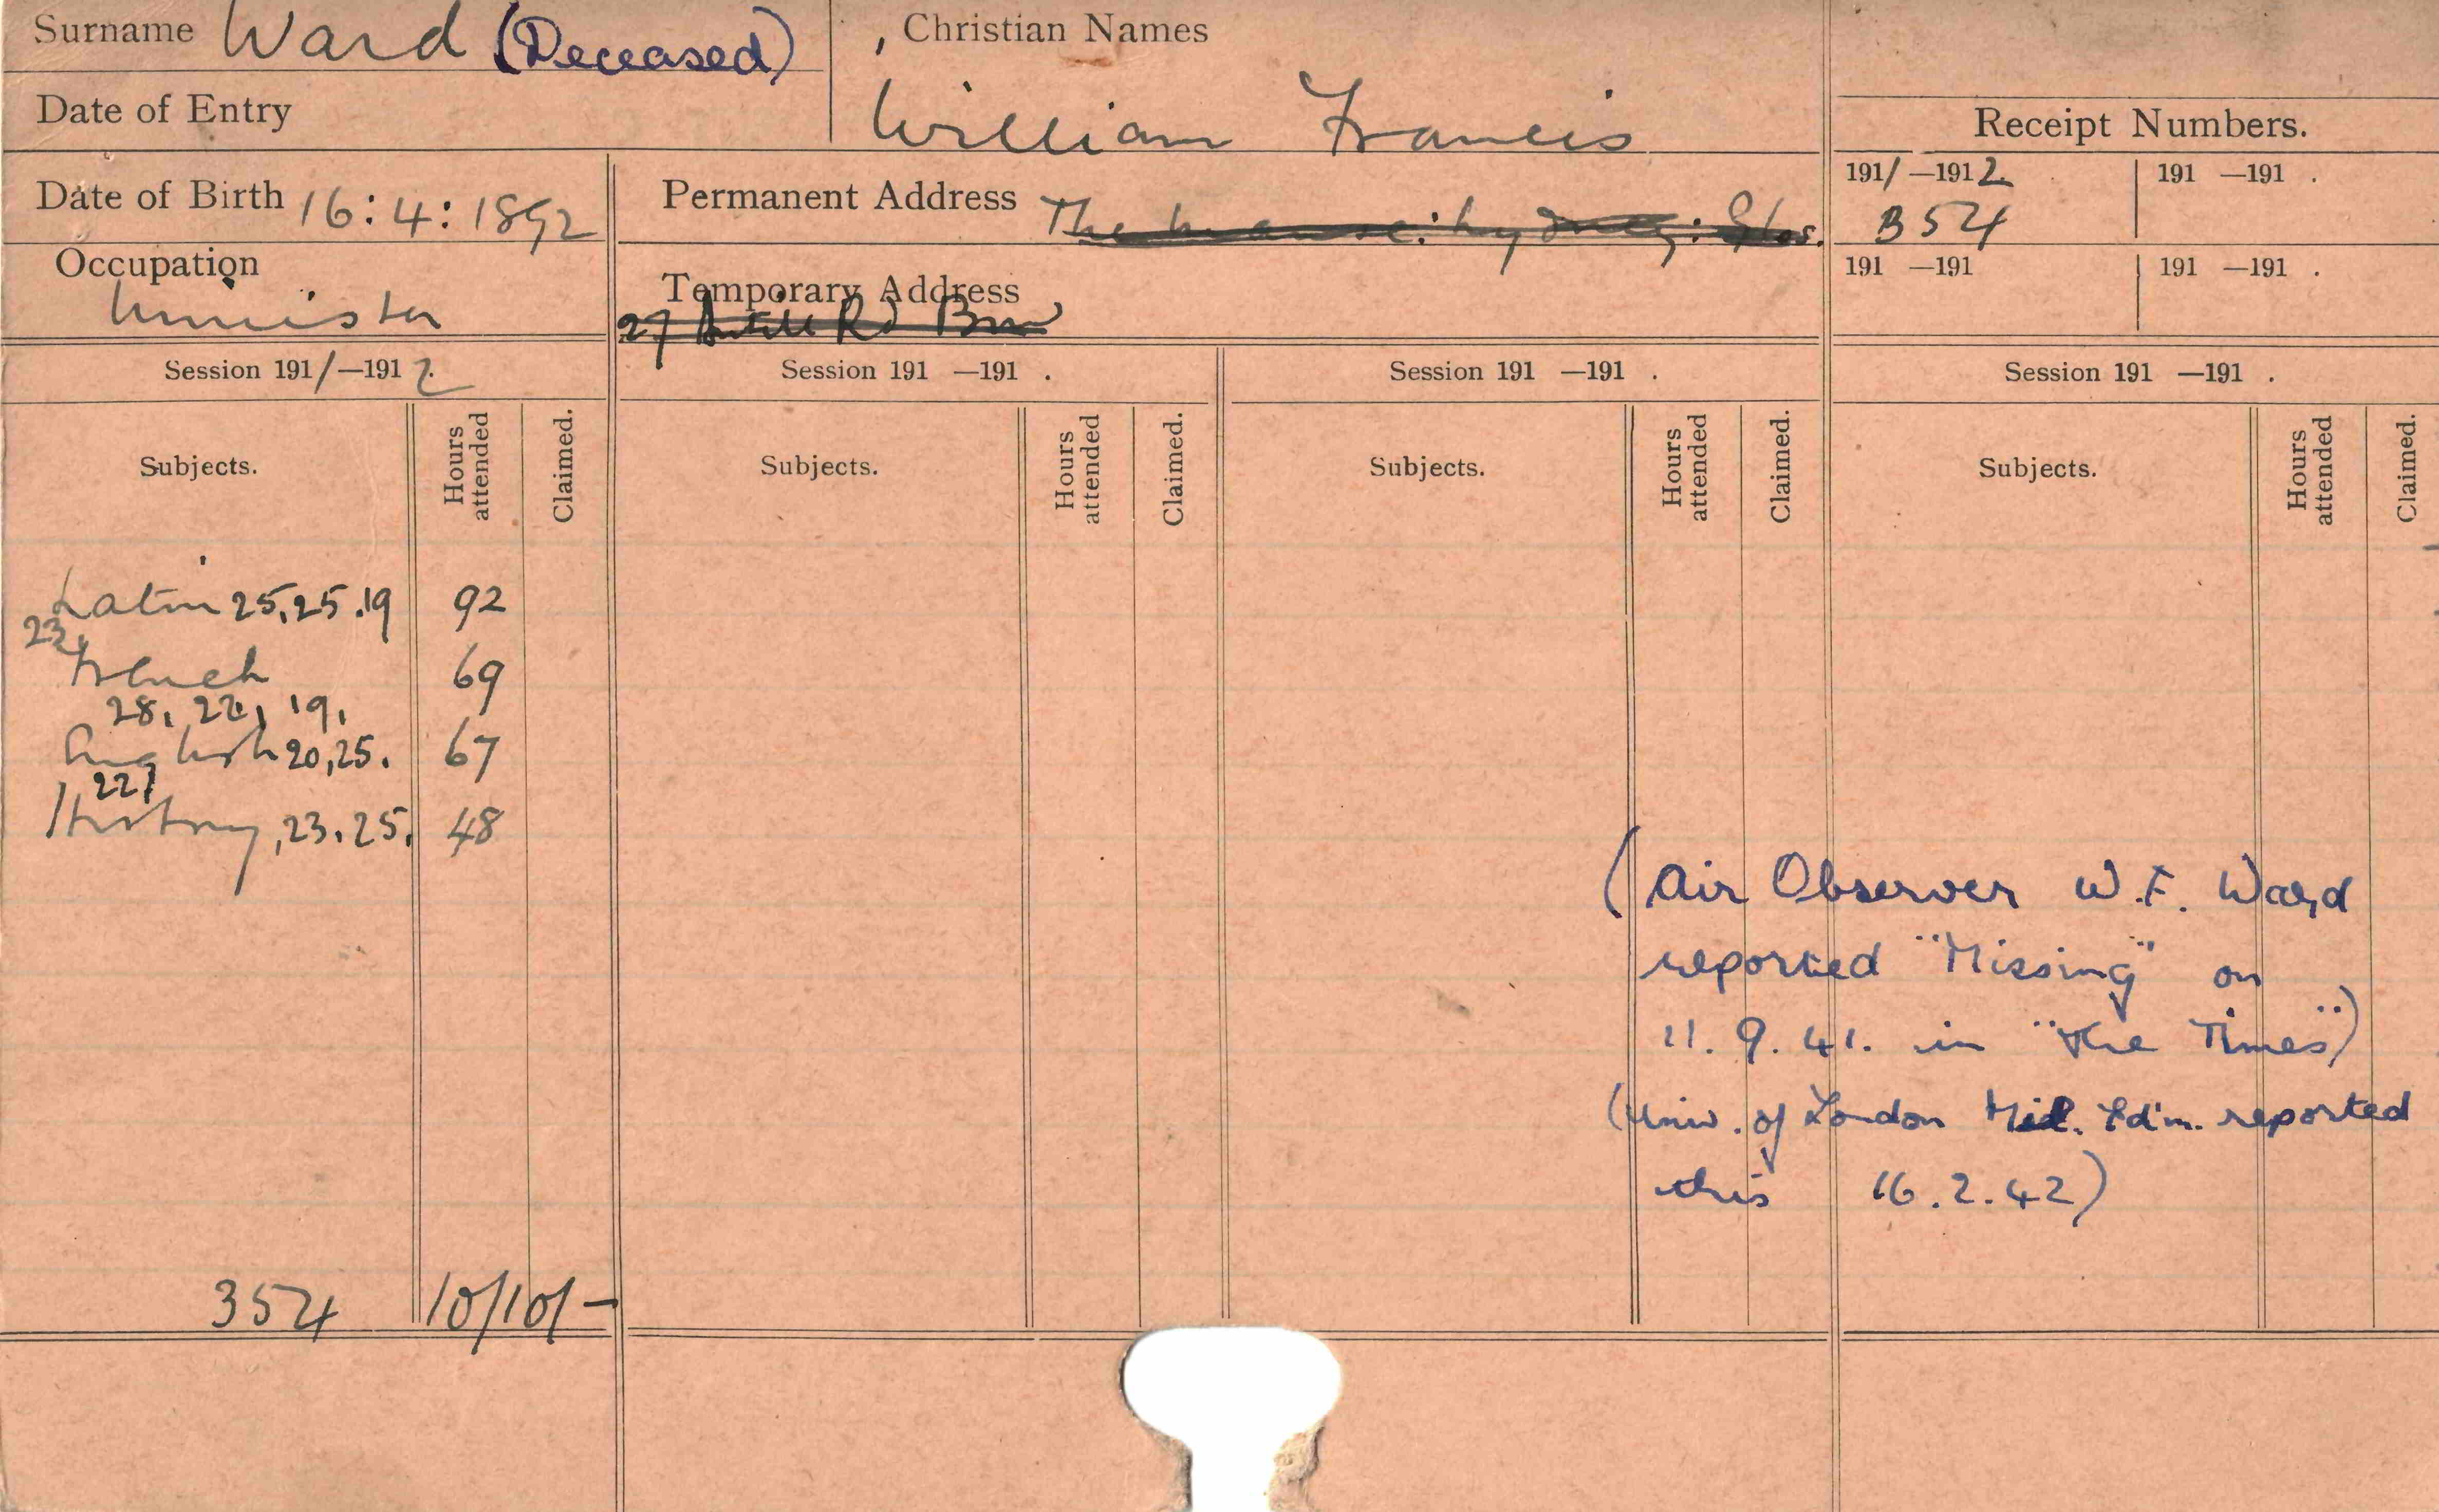 Student card of William Francis Ward showing classes taken, date of birth and date of entry, address and notes about military service